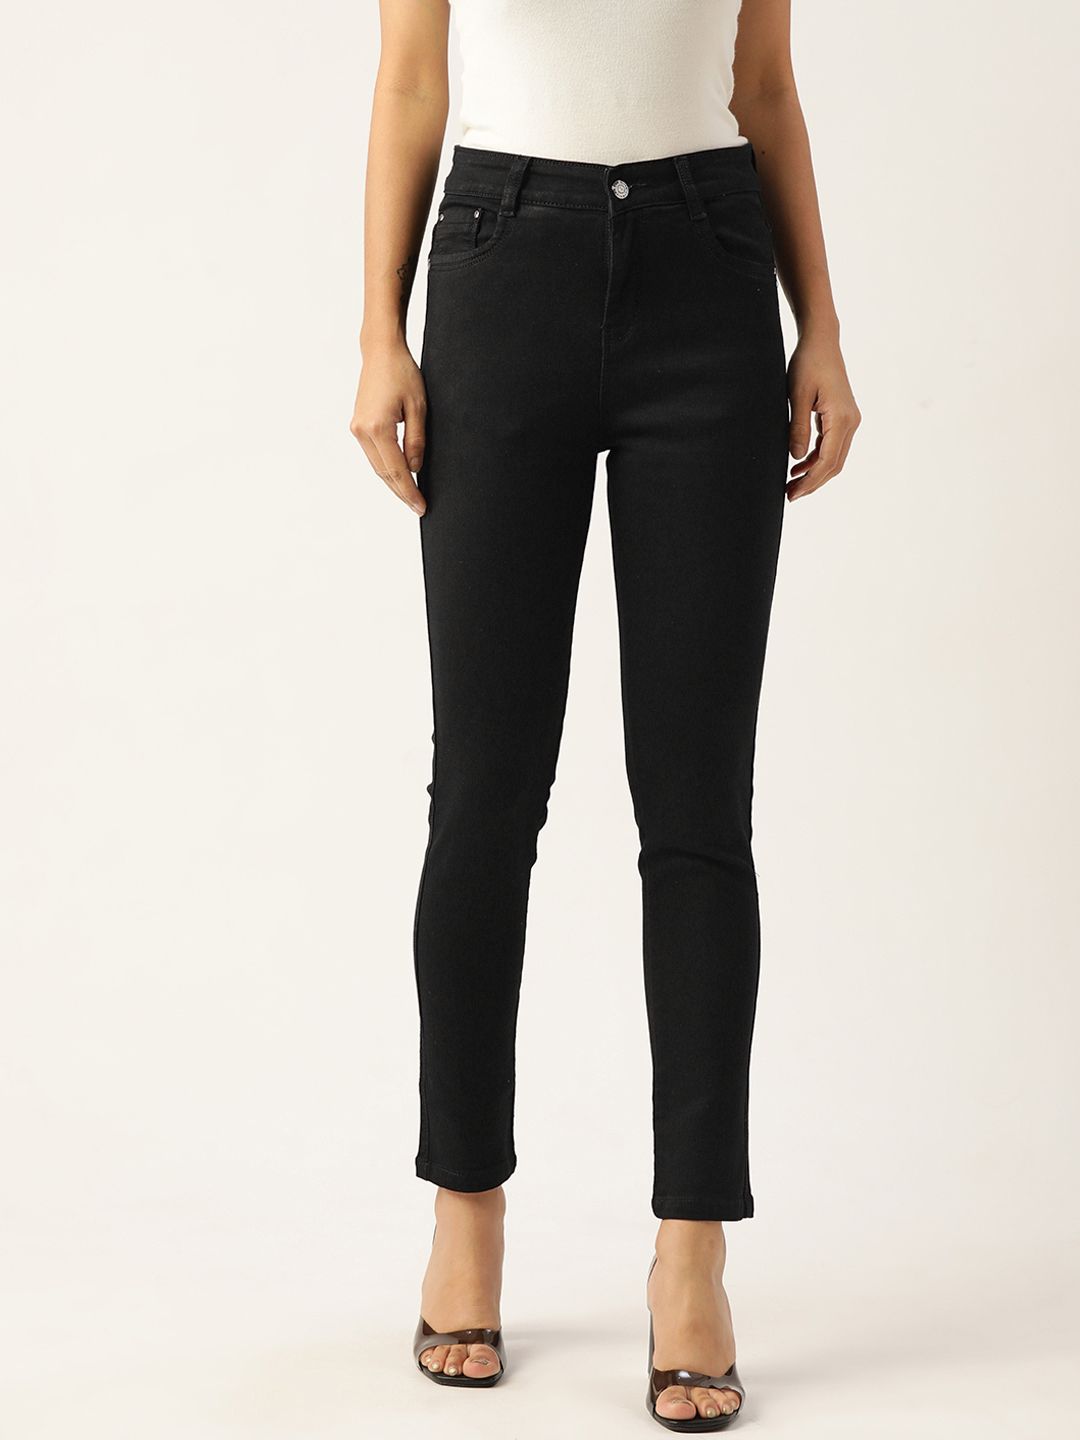 BROOWL Women Black Pencil Skinny Fit Stretchable Cotton Jeans Price in India